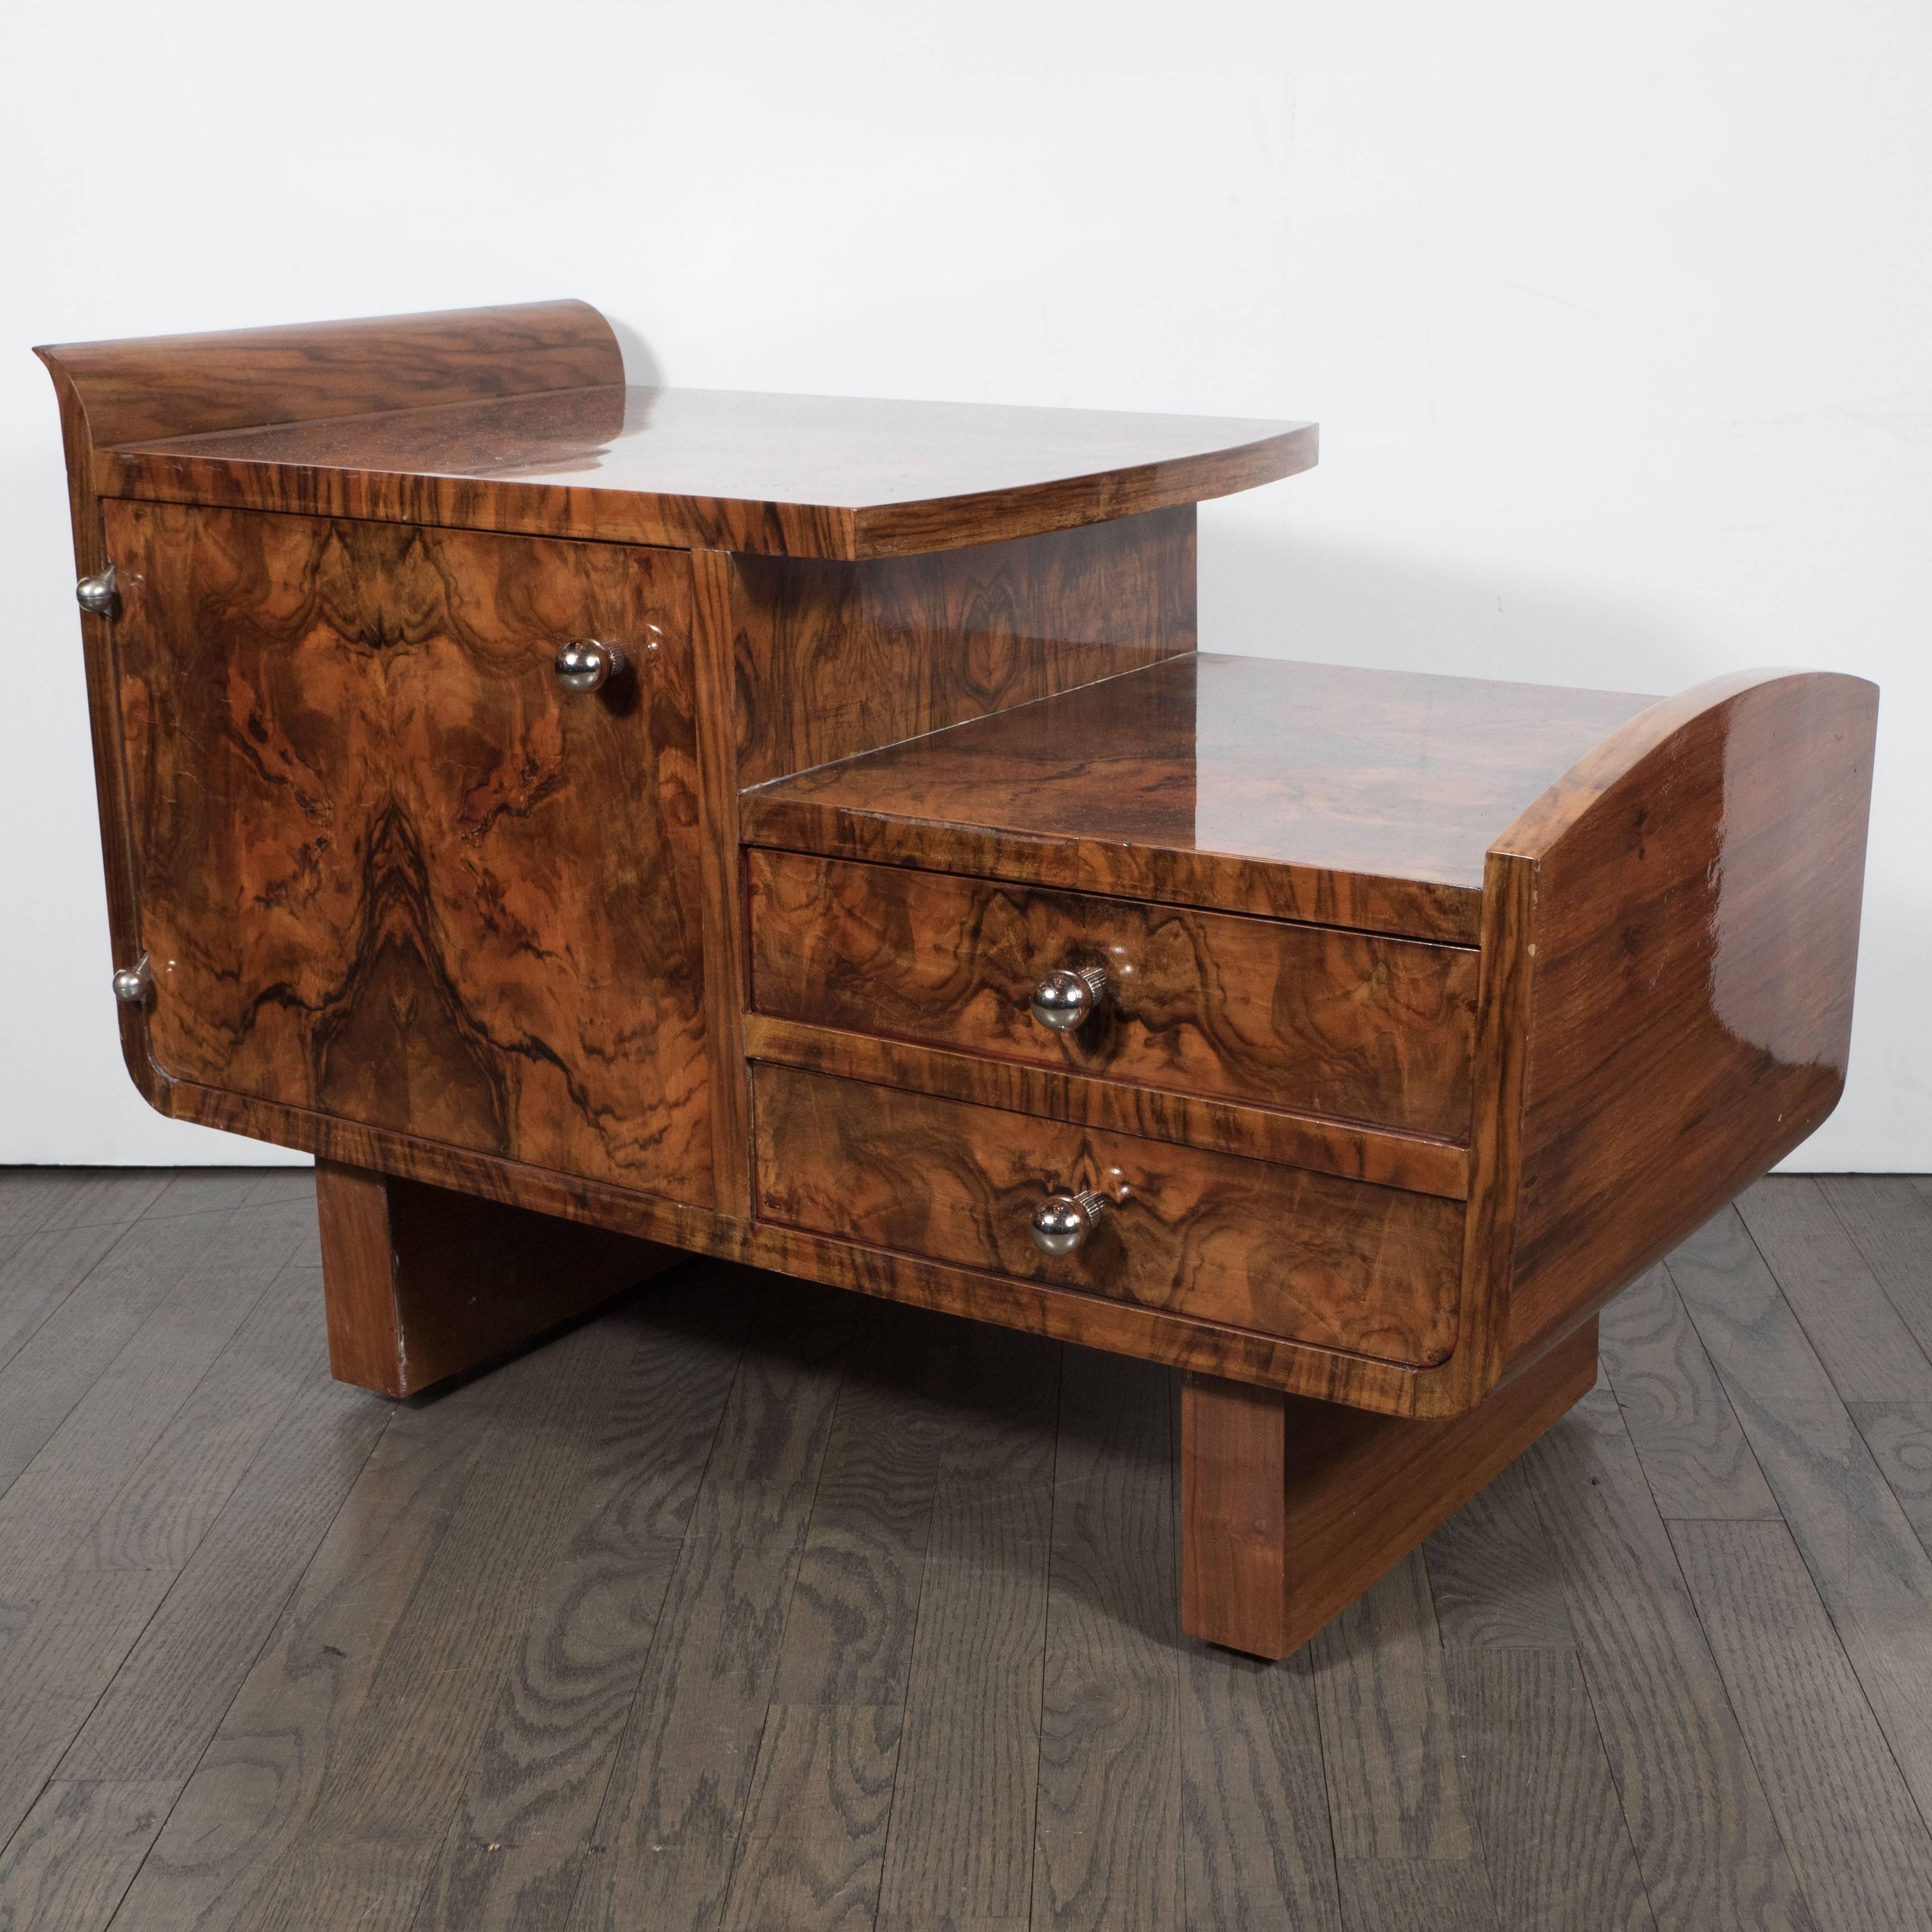 Mid-20th Century Art Deco Exotic Bookmatched Burled Walnut and Nickel Occasional Stepped Table